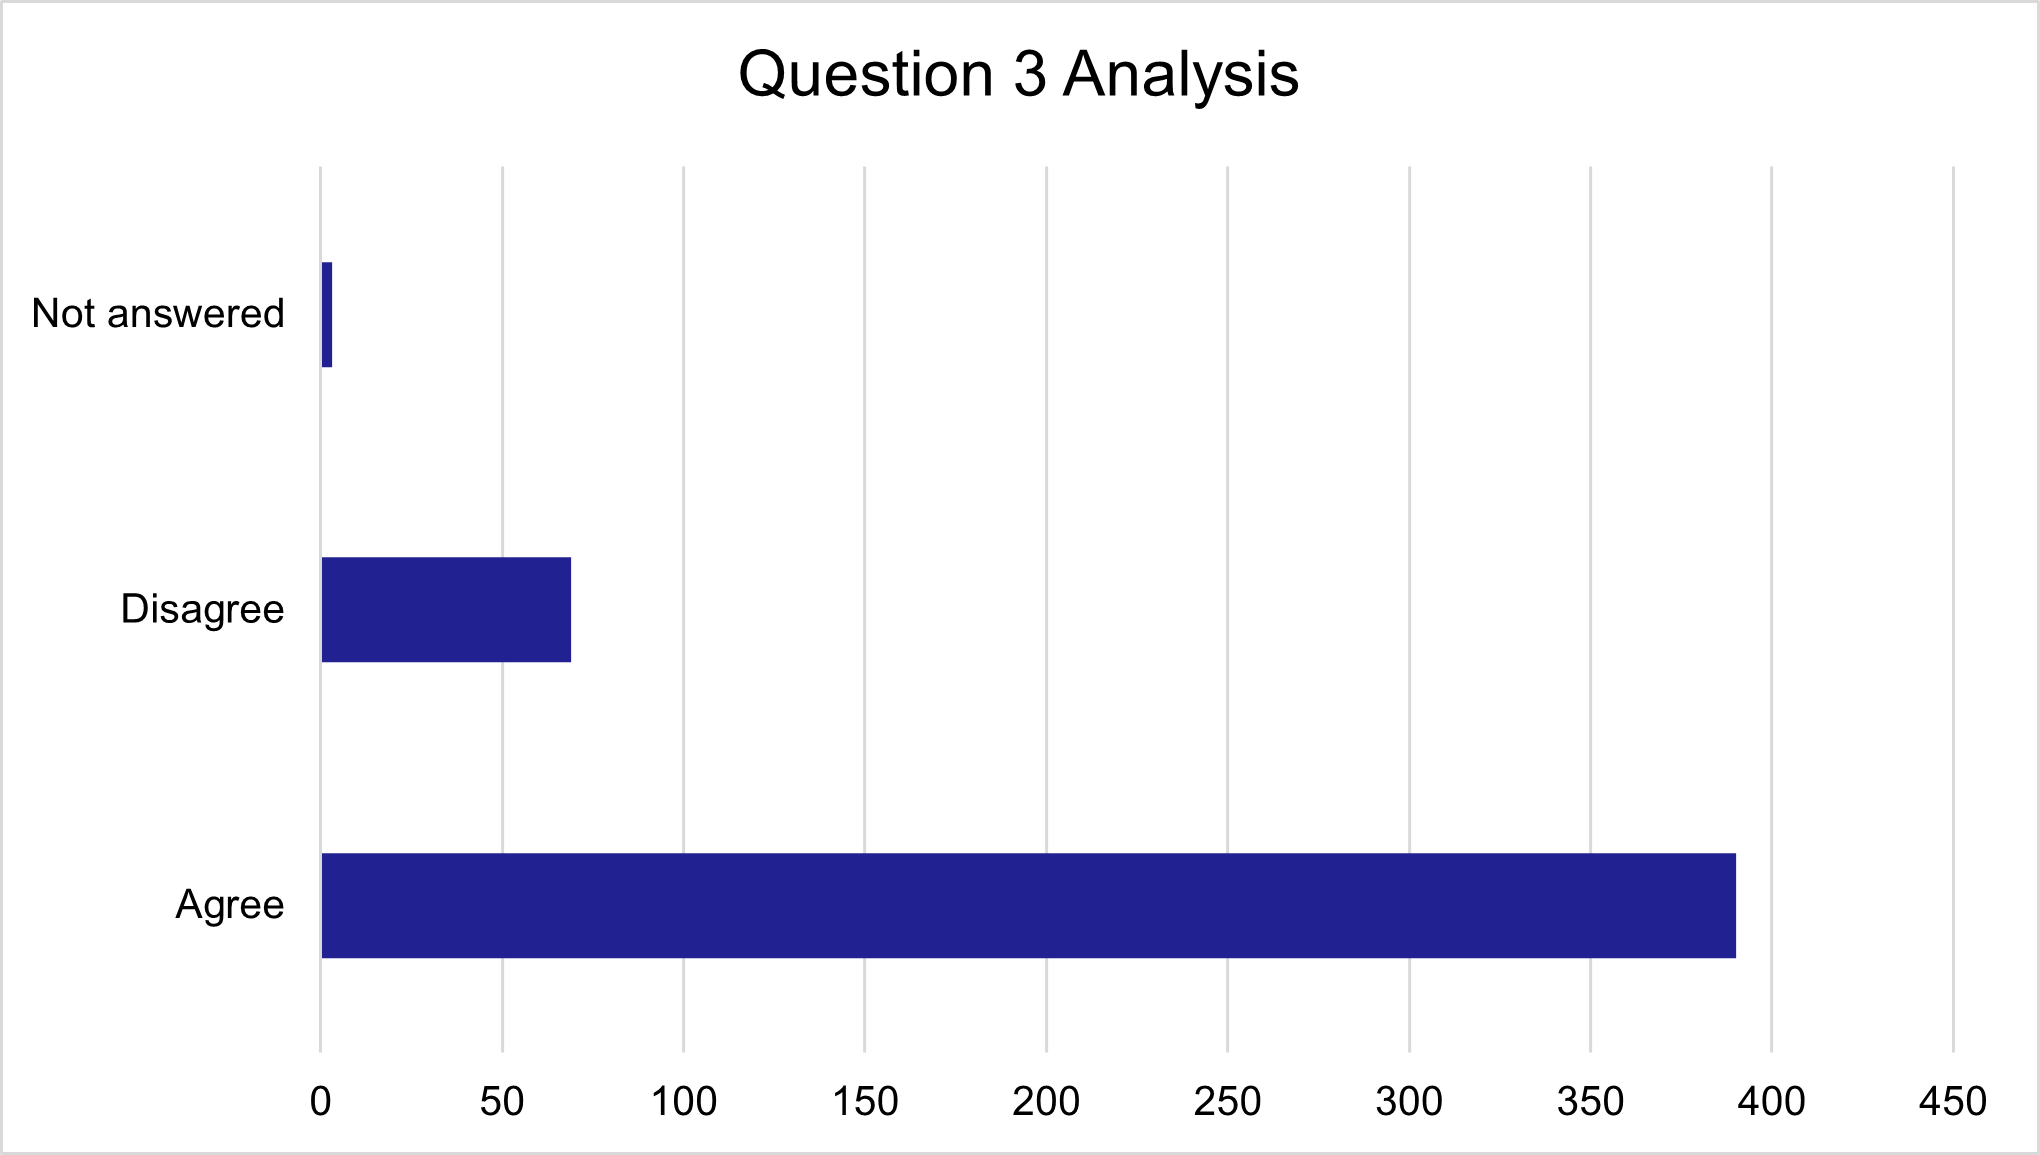 Question 3 responses, as described in text